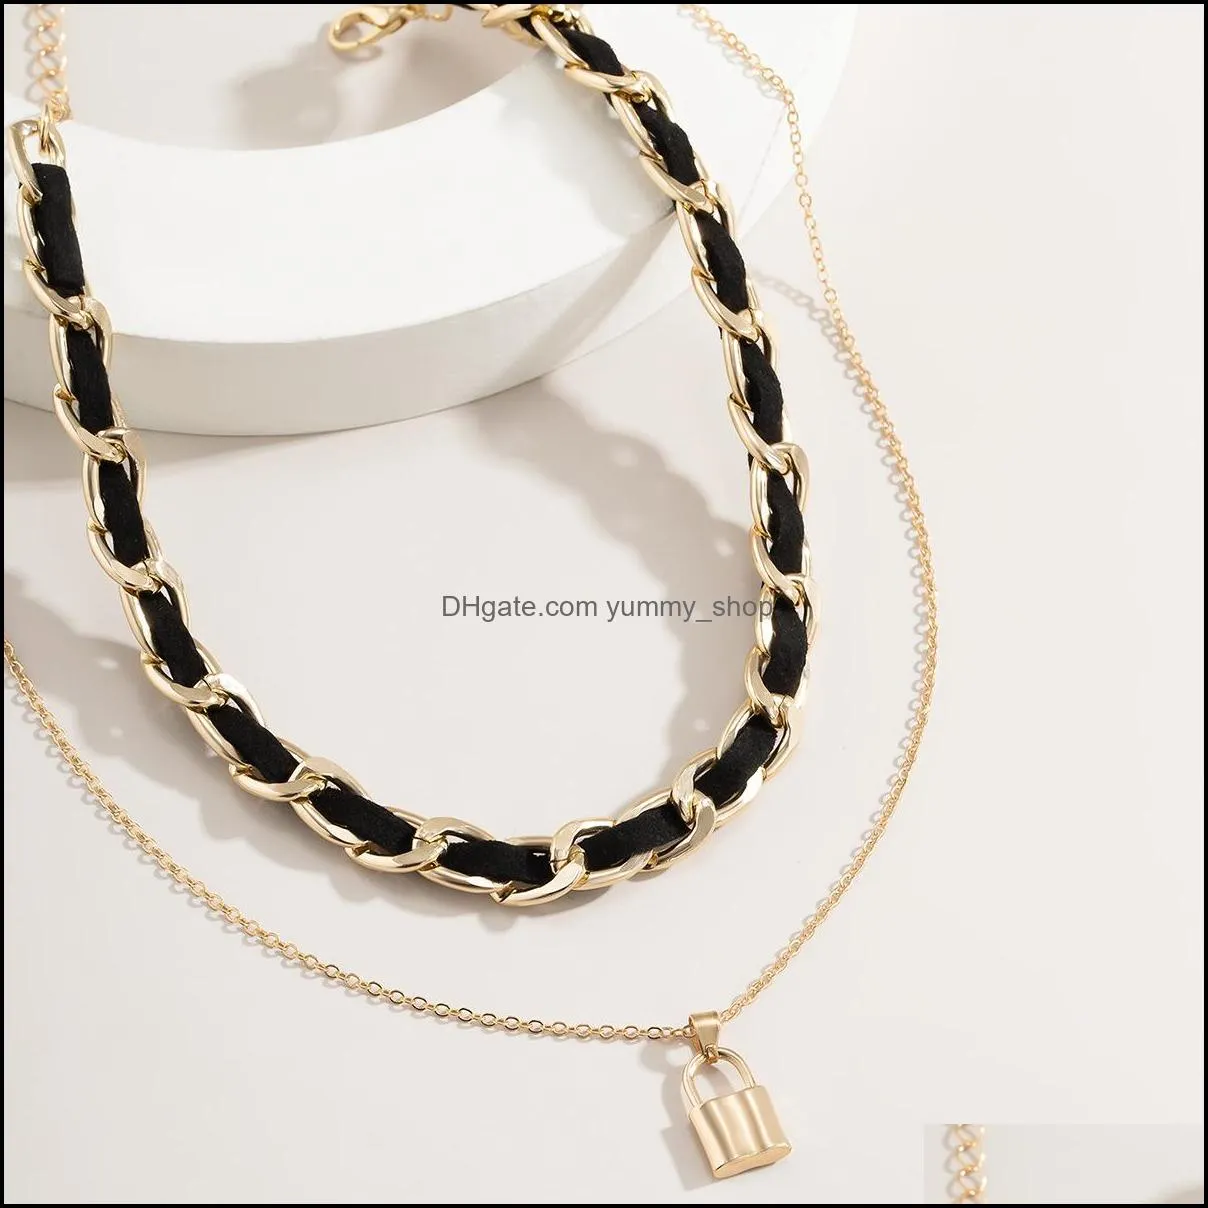 gold chains lock pendant necklace lace multi layer wrap choker necklaces women fashion jewelry gift